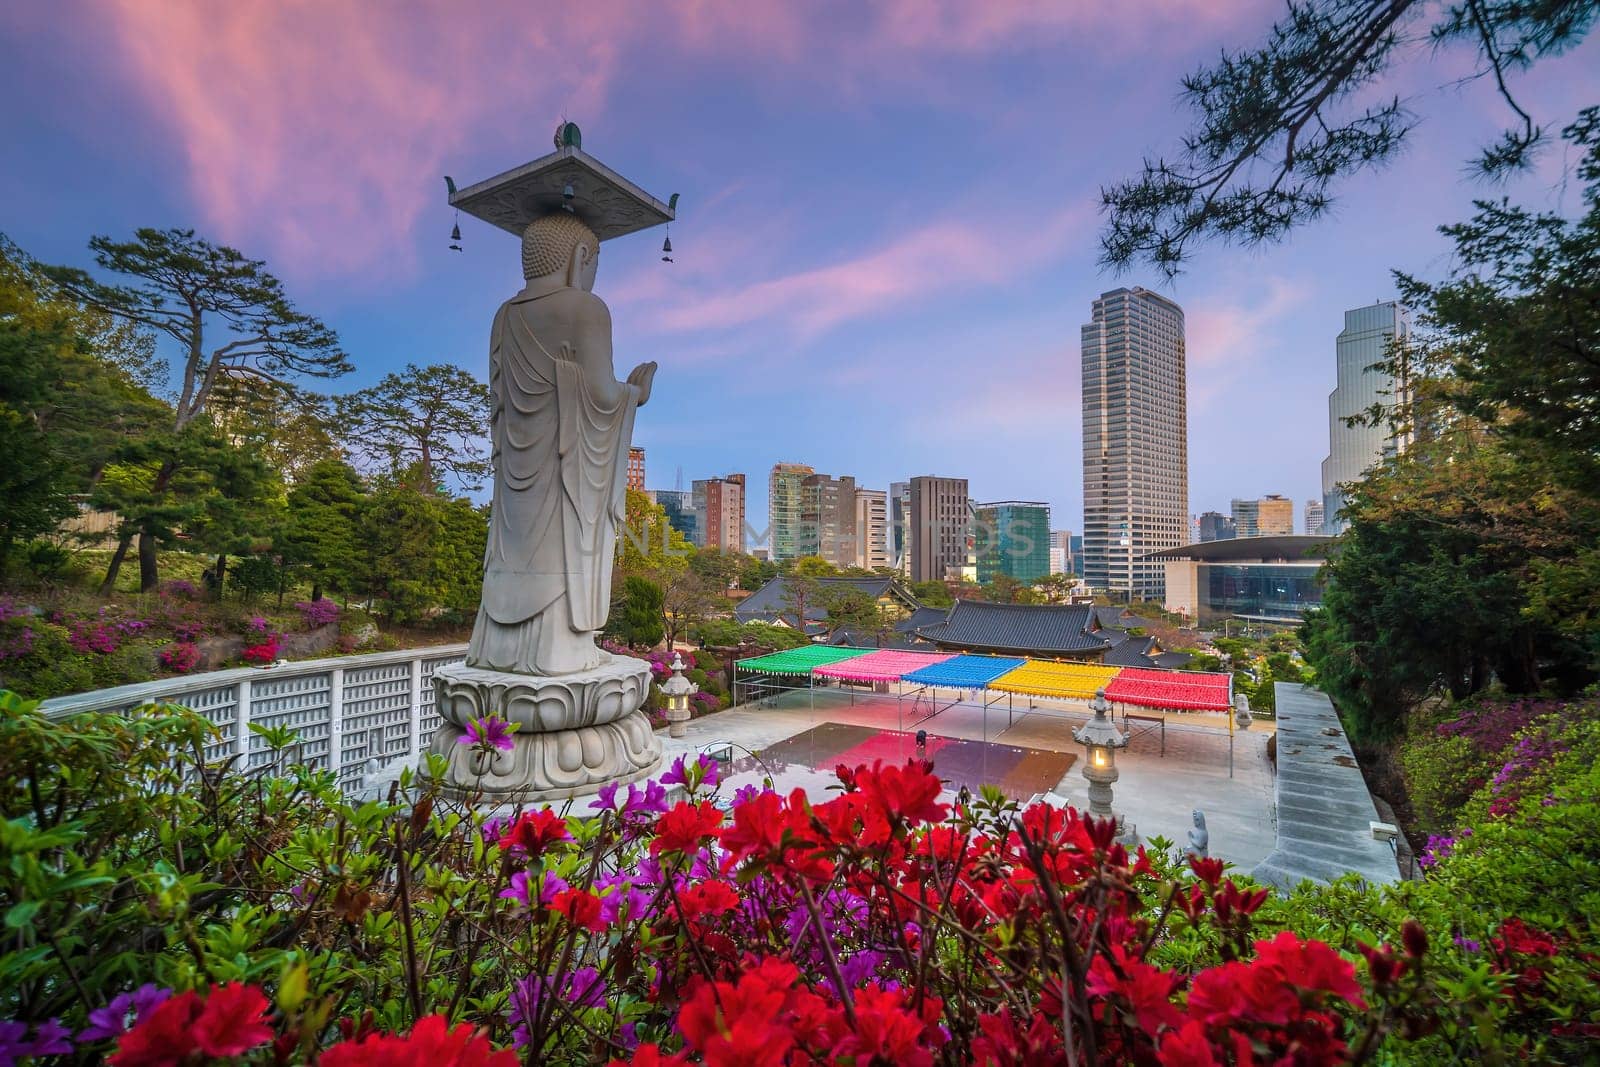 Bongeunsa Temple During the Summer in the Gangnam District of Seoul, South Korea with colorful flowers